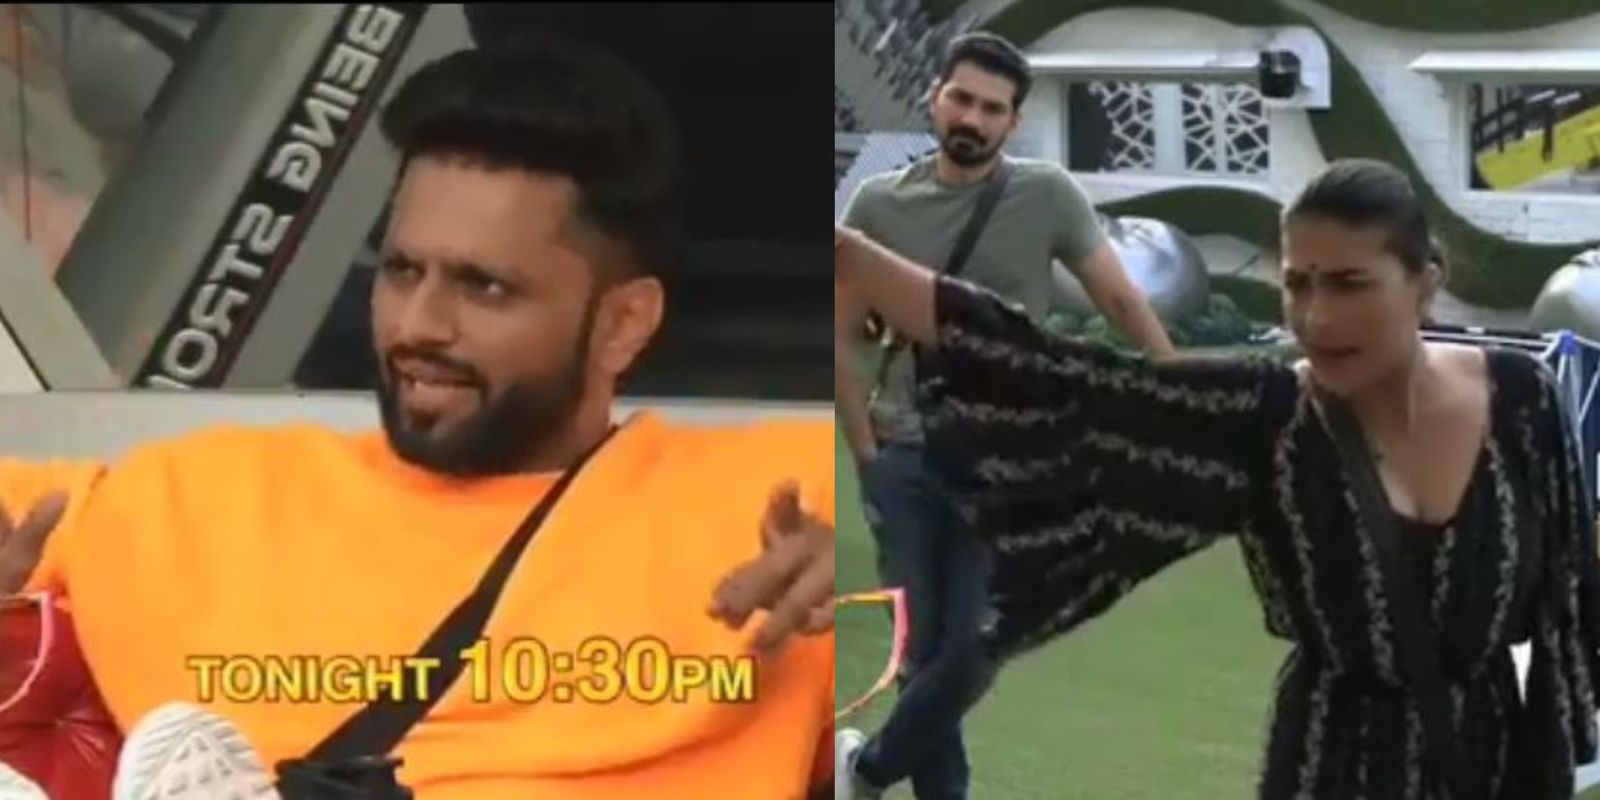 Bigg Boss 14 Promo: Pavitra Punia And Rahul Vaidya Go From Pyaar To Takraar, Get Into A Major Fight; Watch